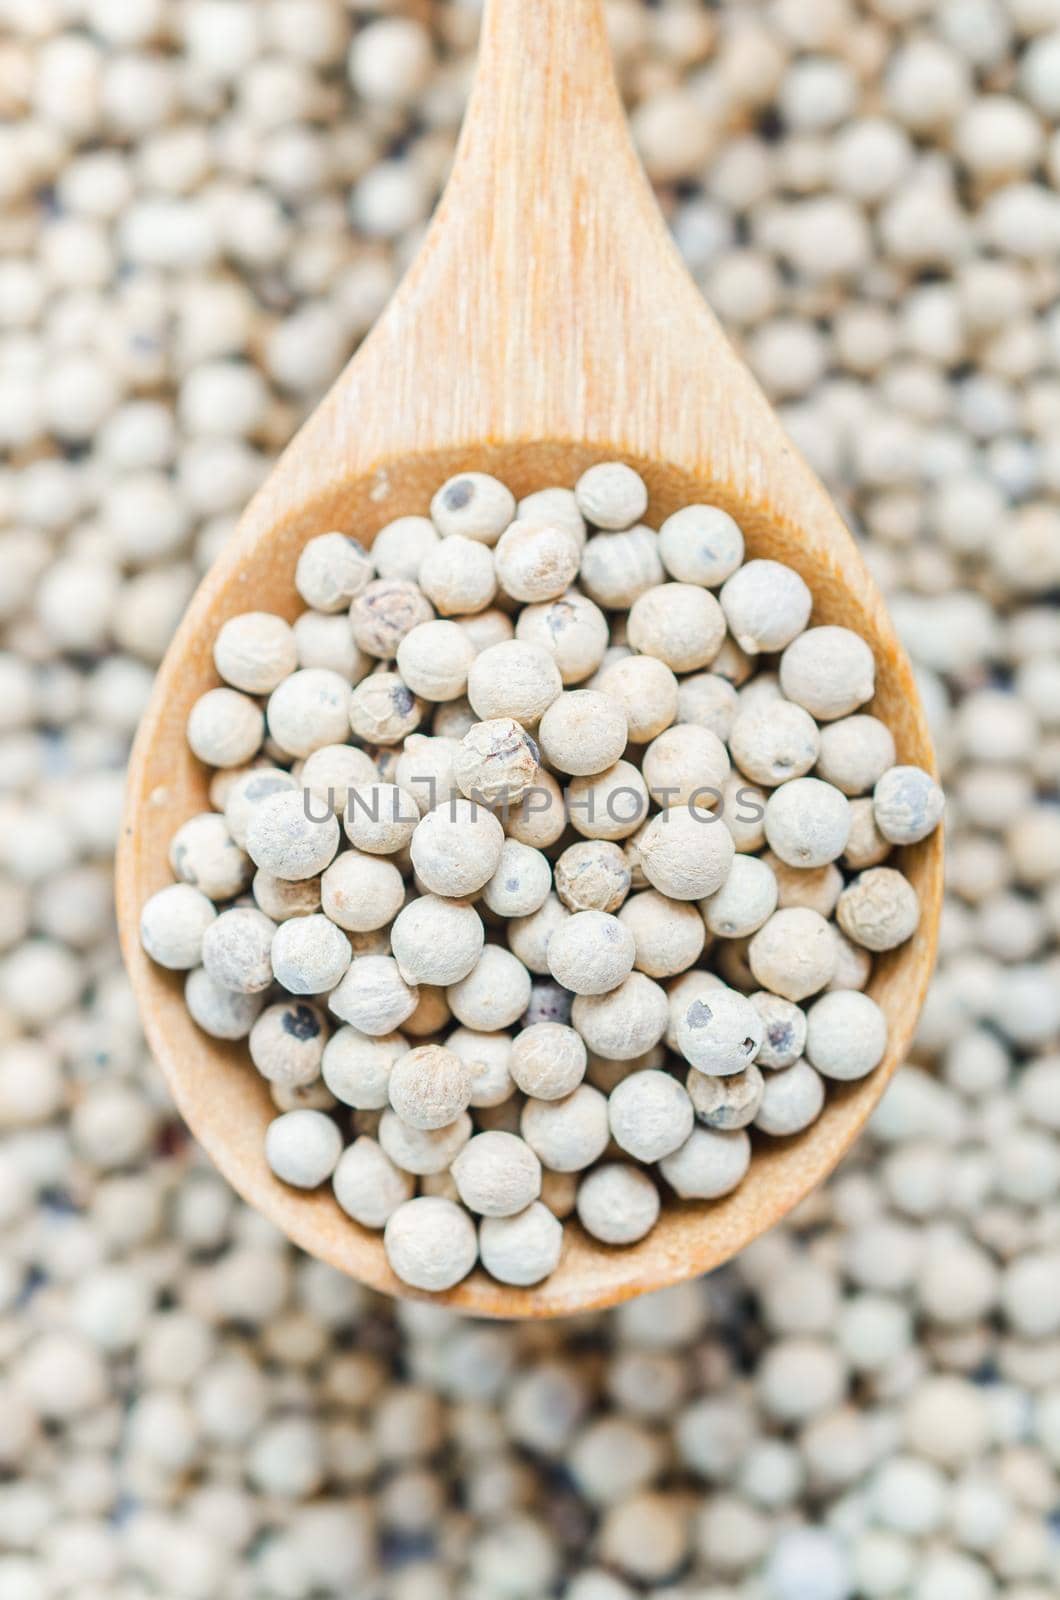 White pepper seeds (peppercorn) in wooden spoon on tablecloth background. by Gamjai